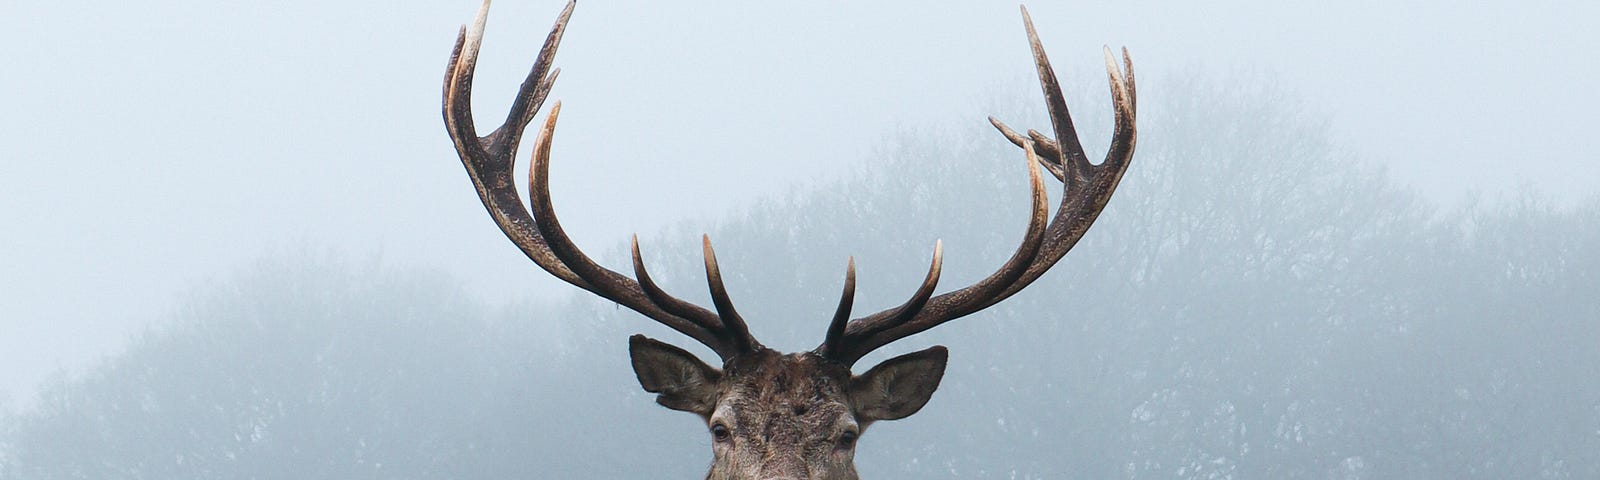 A male deer with antlers looking straight at the camera